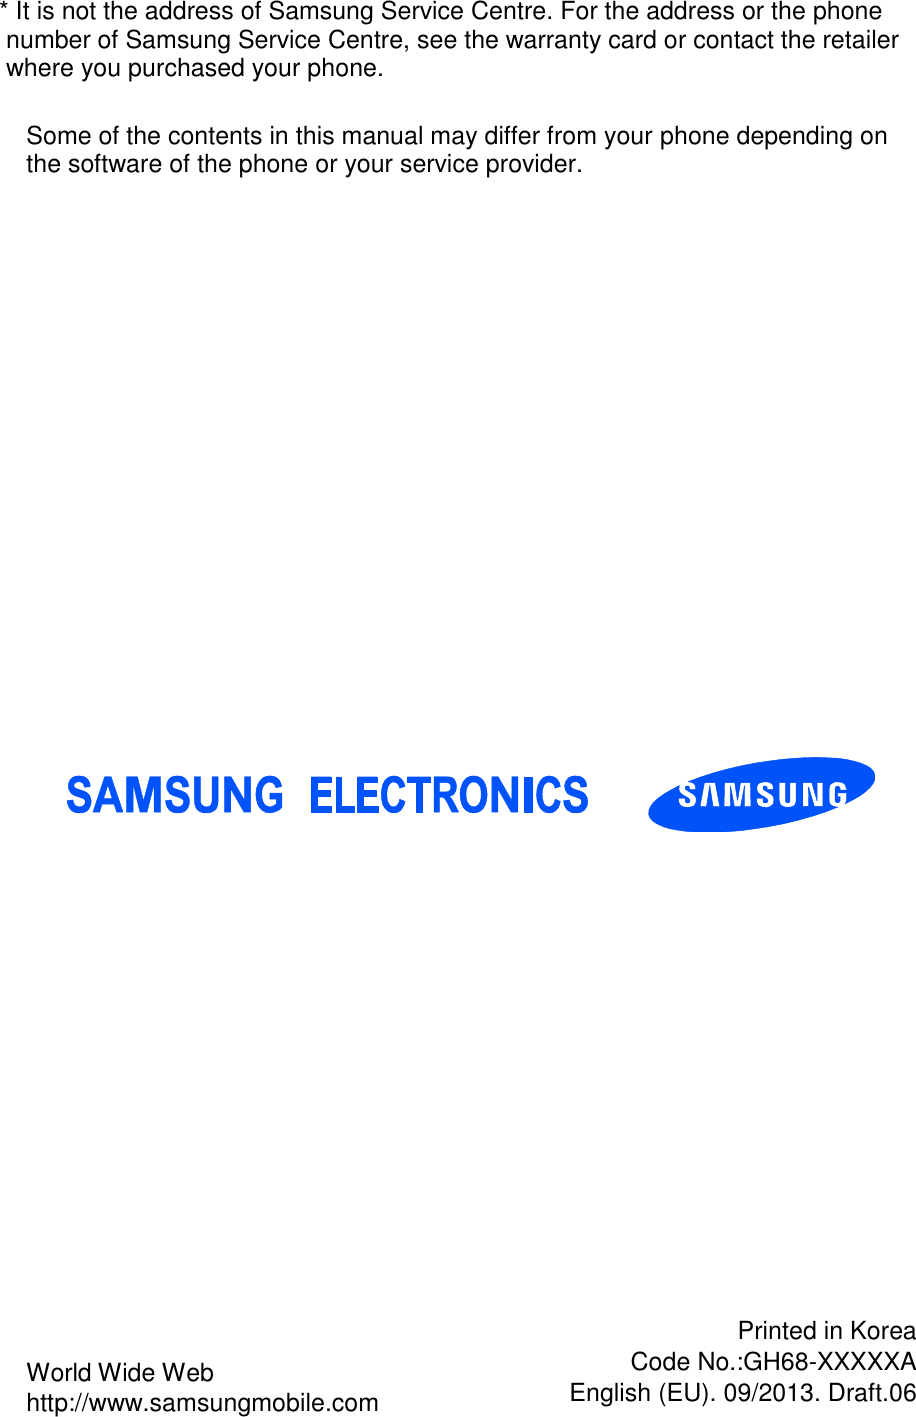 * It is not the address of Samsung Service Centre. For the address or the phone number of Samsung Service Centre, see the warranty card or contact the retailer where you purchased your phone.                             World Wide Web http://www.samsungmobile.com Printed in Korea Code No.:GH68-XXXXXA English (EU). 09/2013. Draft.06 Some of the contents in this manual may differ from your phone depending on the software of the phone or your service provider. 